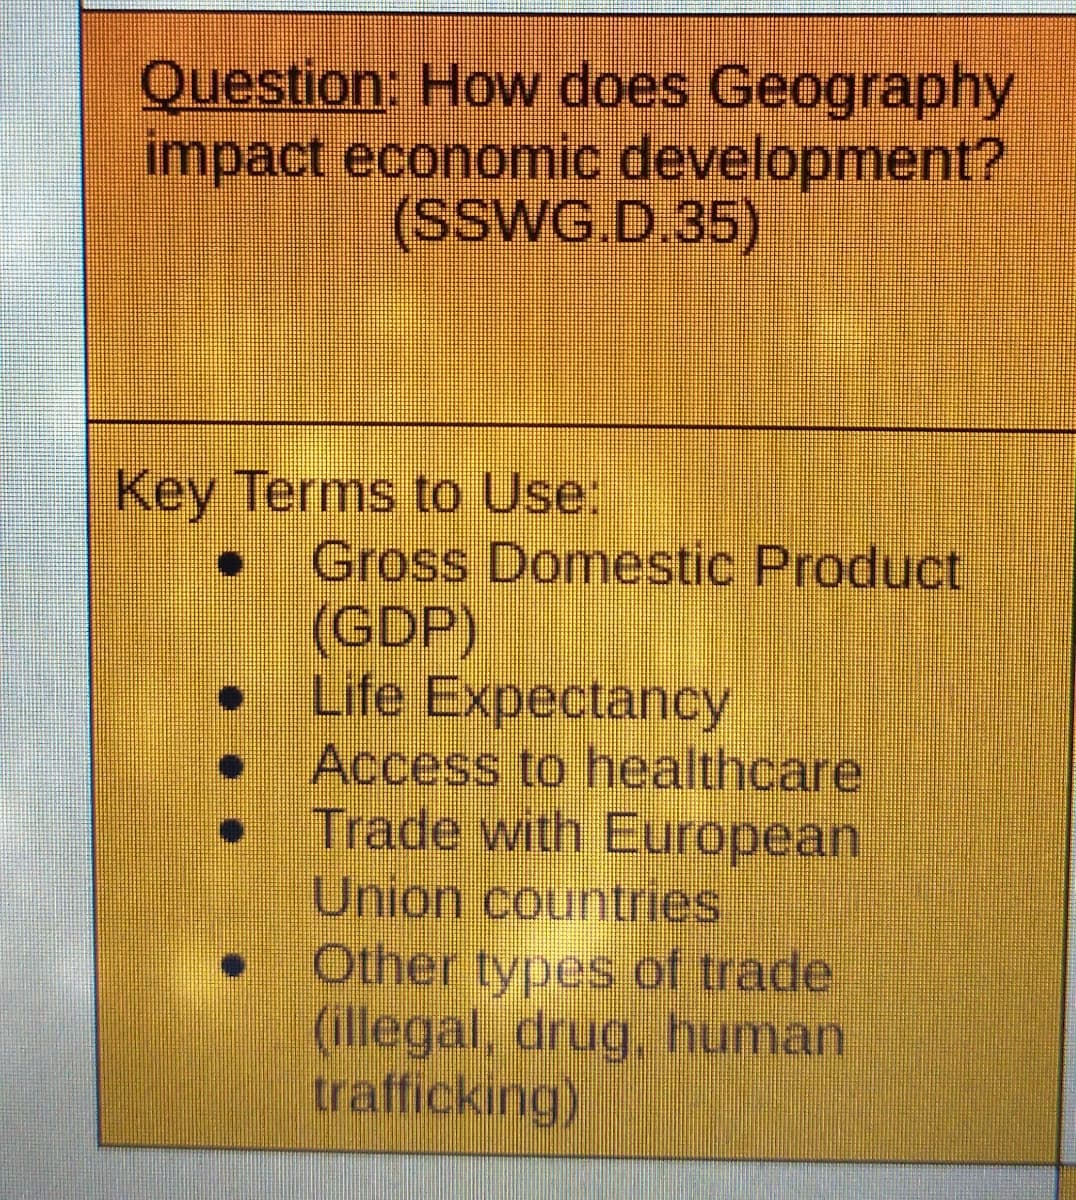 Question: How does Geography
impact economic development?
(SSWG.D.35)
Key Terms to Use:
• Gross Domestic Product
(GDP)
Life Expectancy
Access to healthcare
Trade with European
Union countries
Other types of trade
(illegal, drug, human
trafficking)
